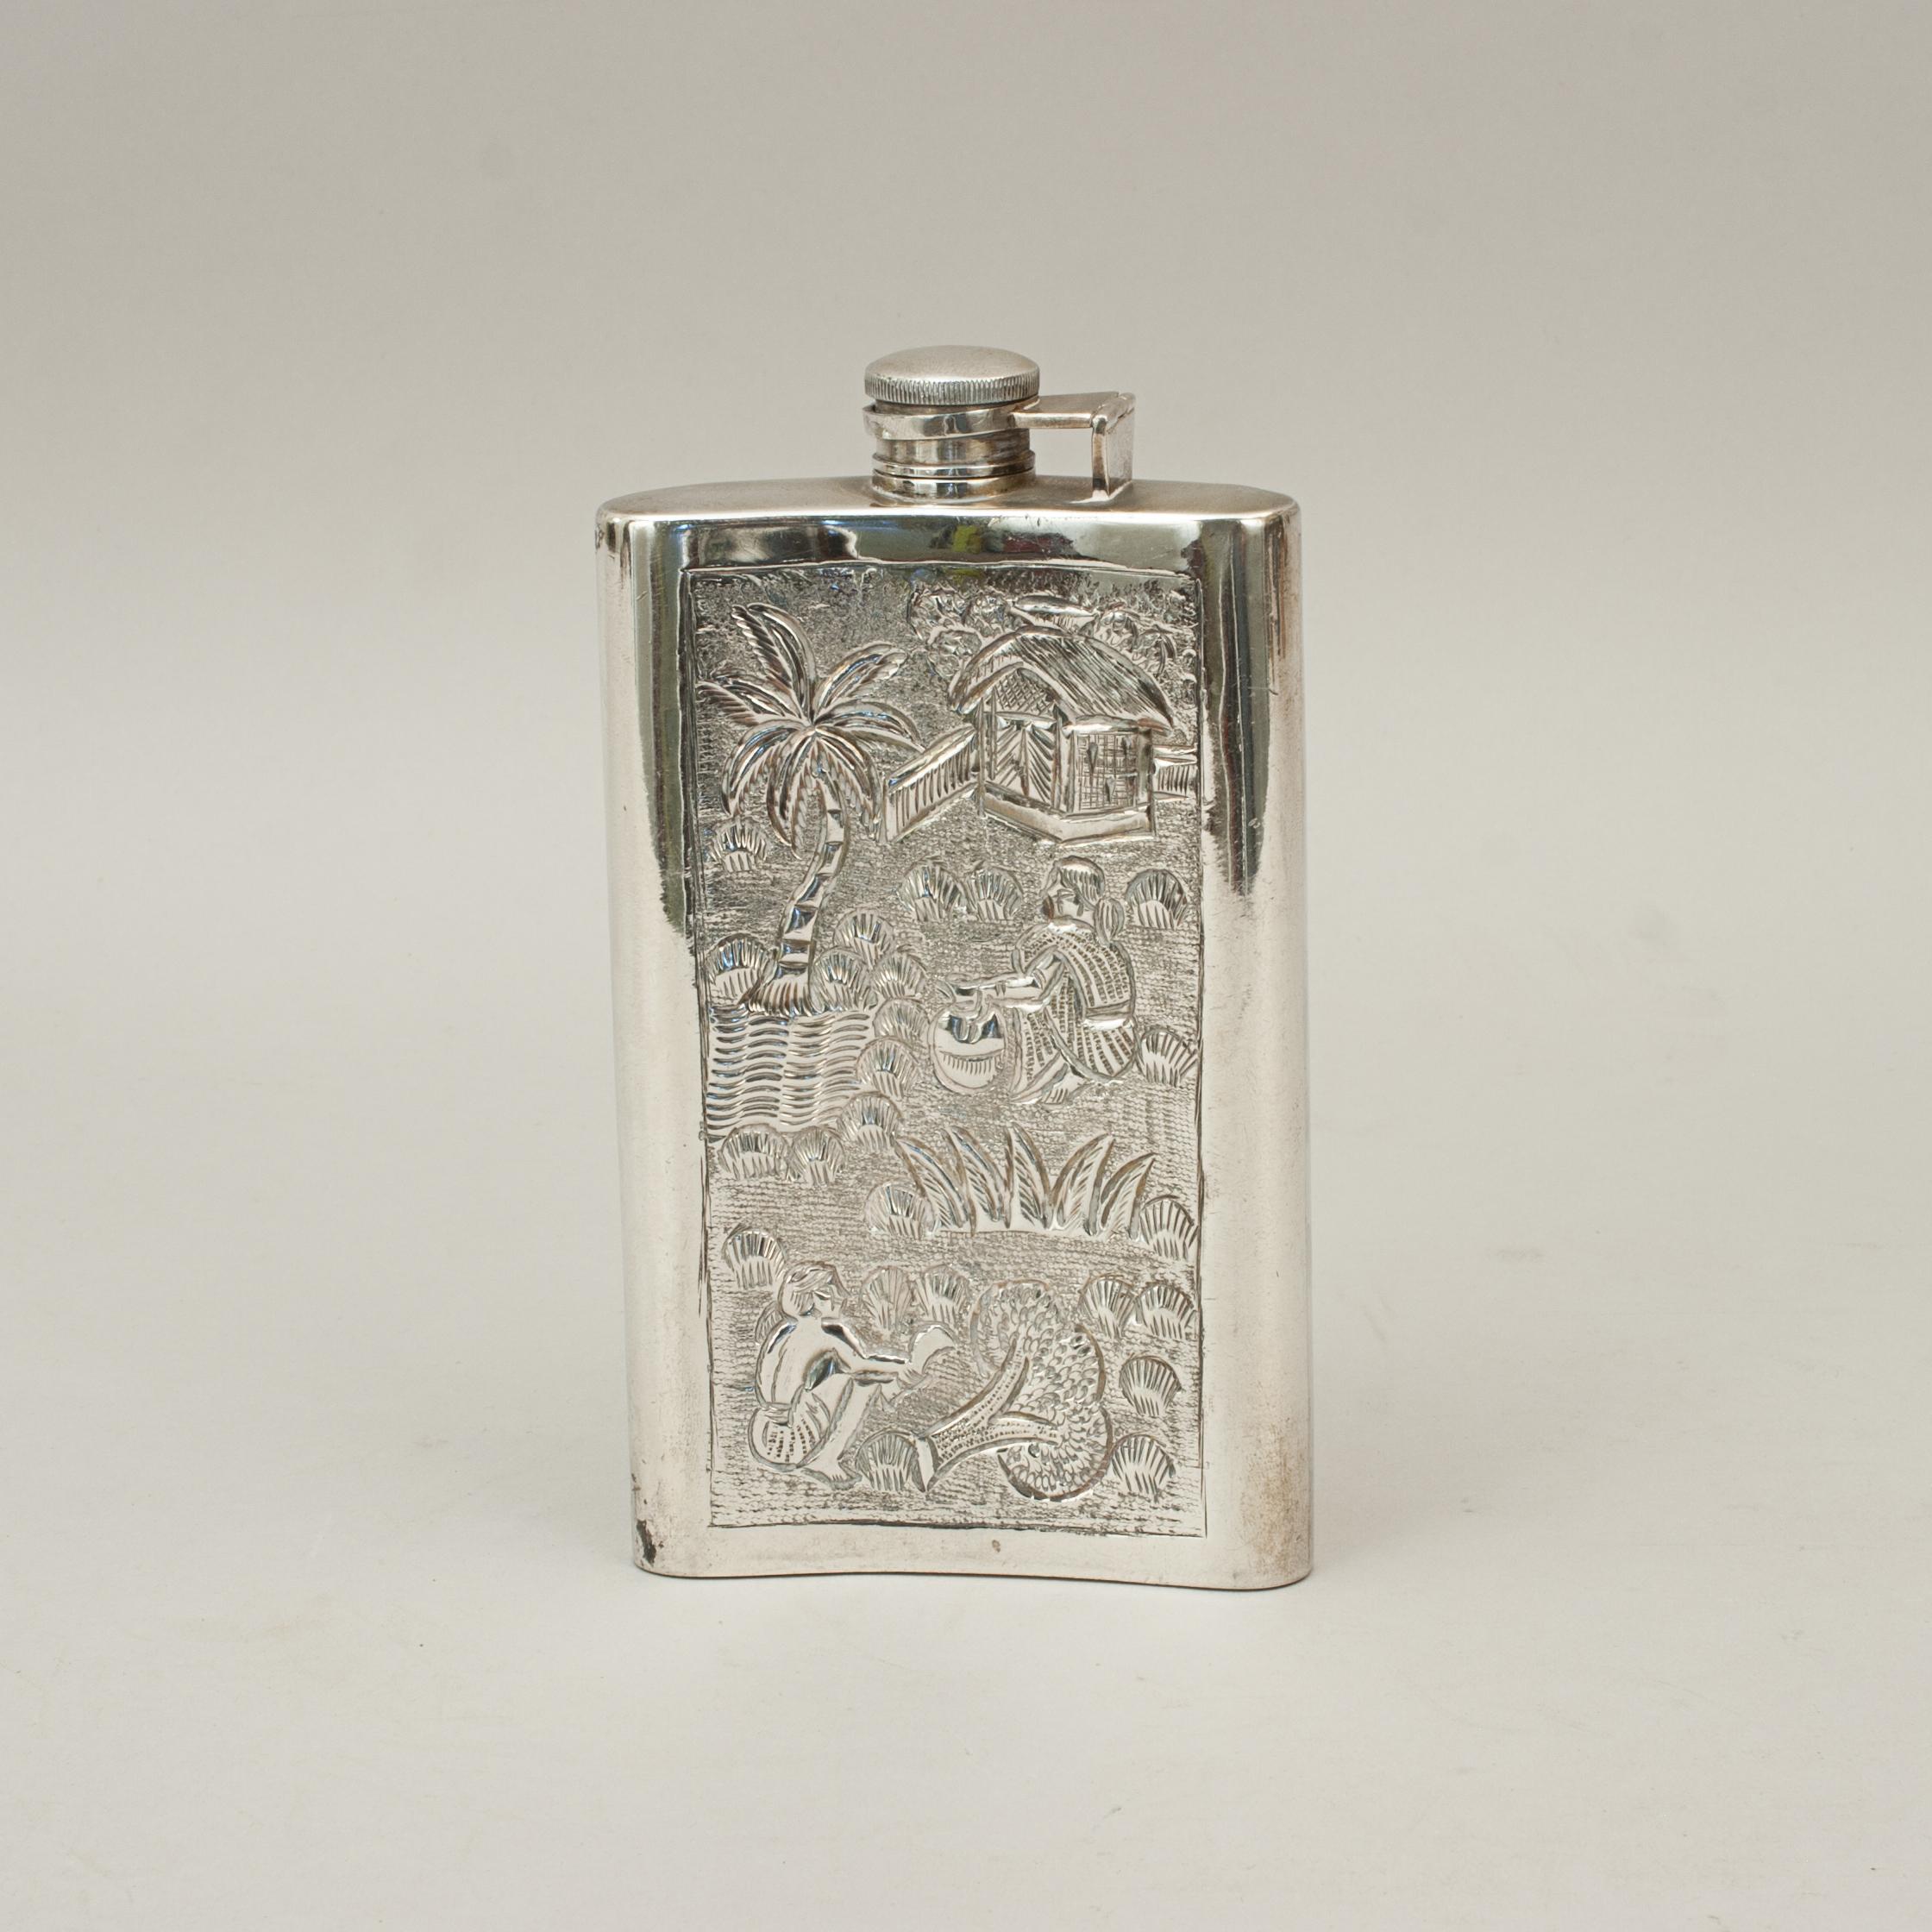 Gentleman's hip flask with eastern design.
A very nice large spirit hip flask with curved body and heavily embossed decoration. The flask with hinged screw lid. The decoration covering the flask is of elephant, bulls, thatched hut, a lady drawing